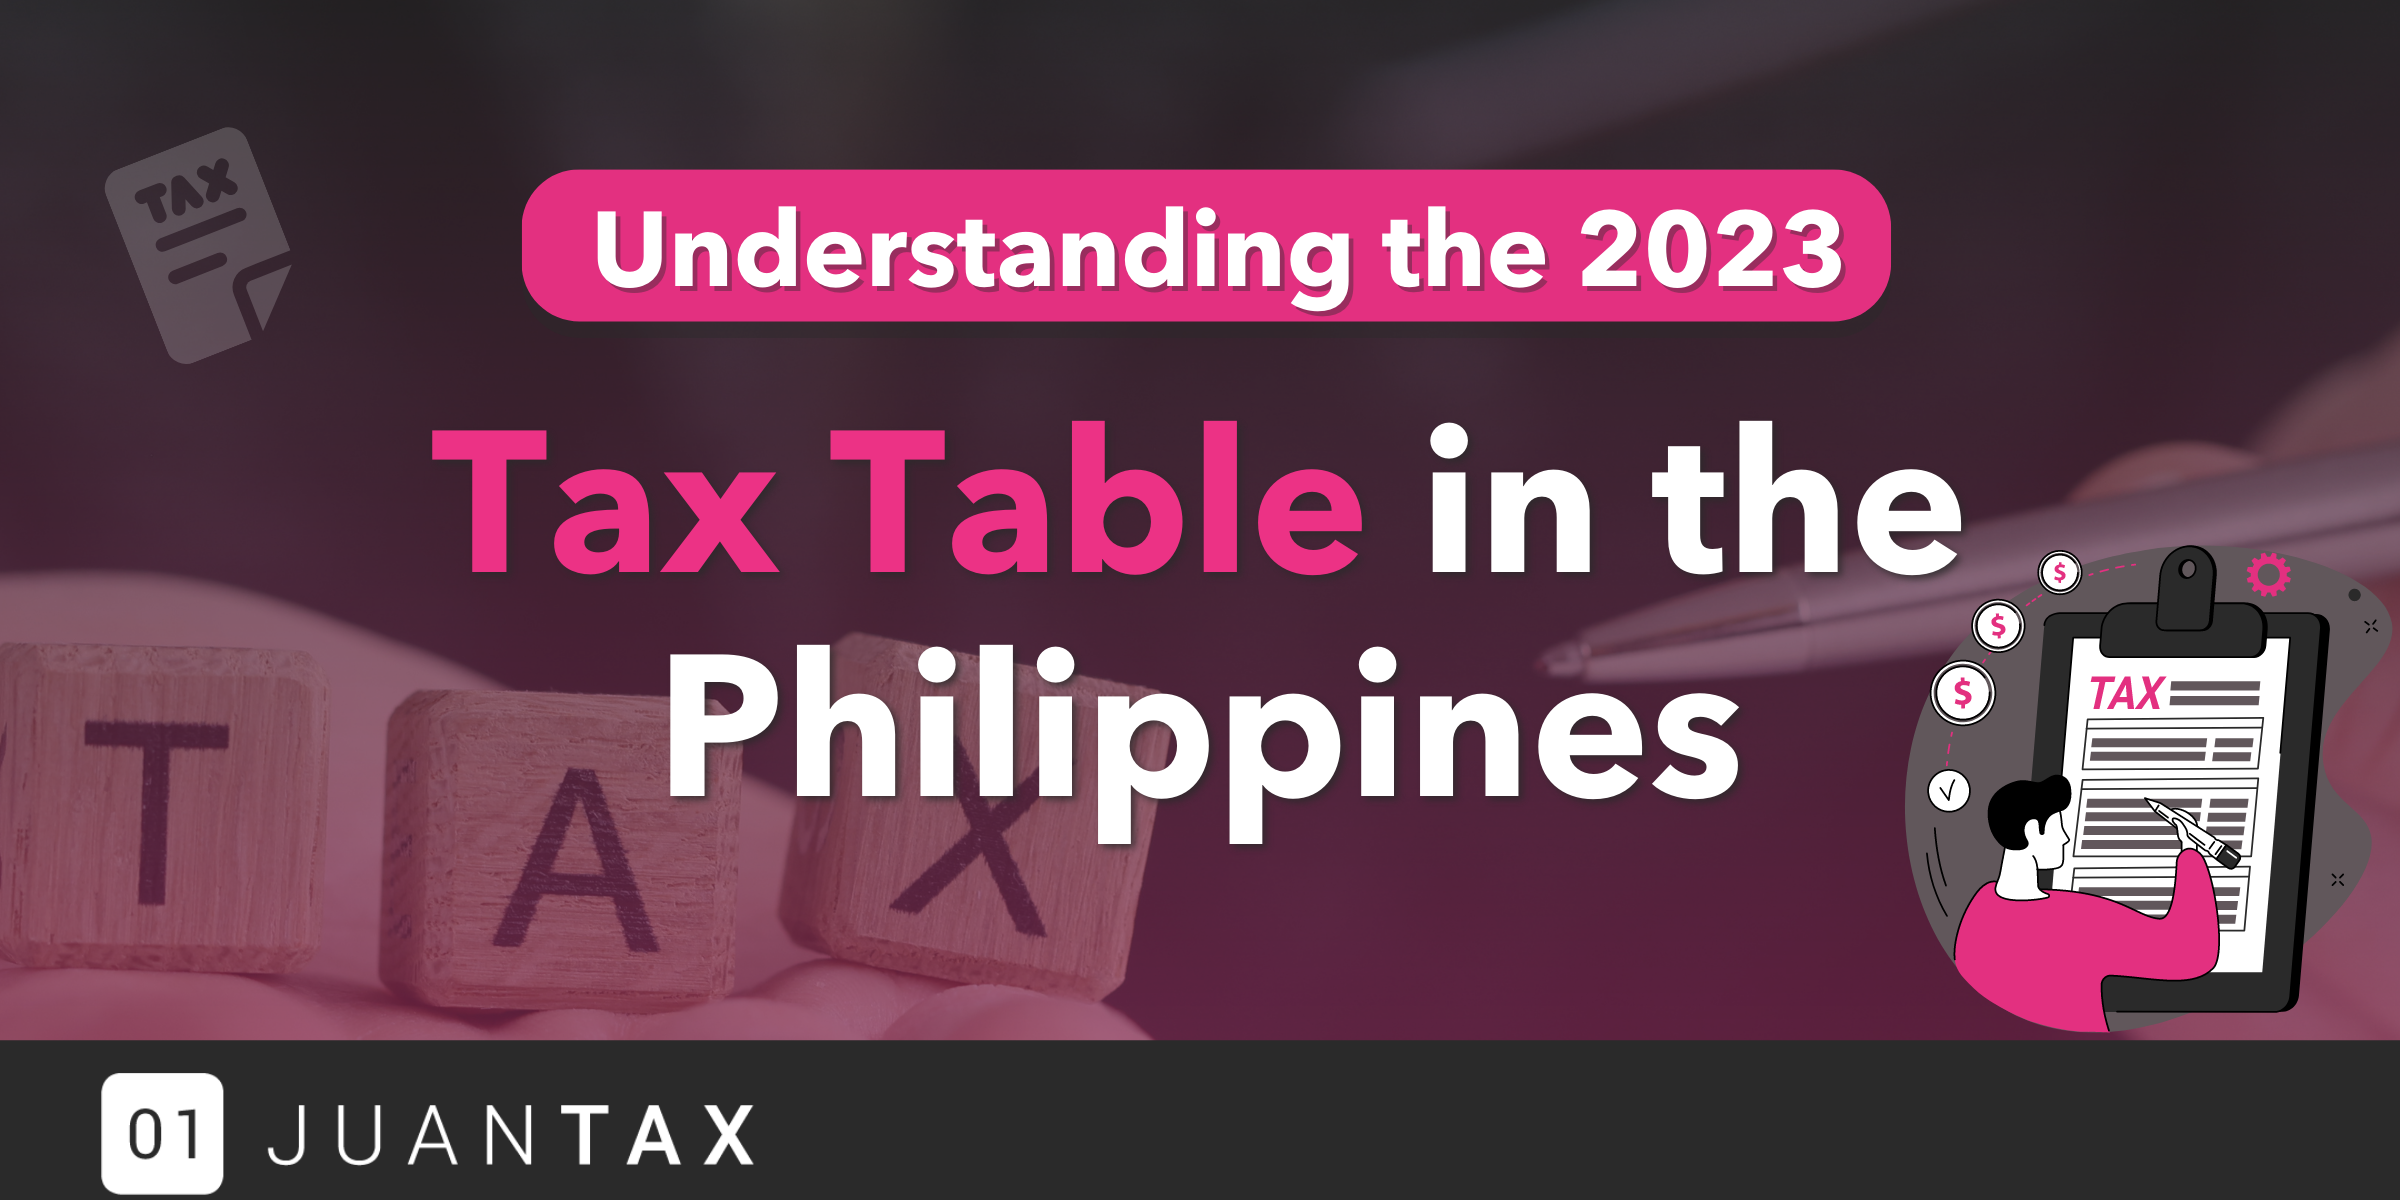 understanding-the-2023-tax-table-in-the-philippines